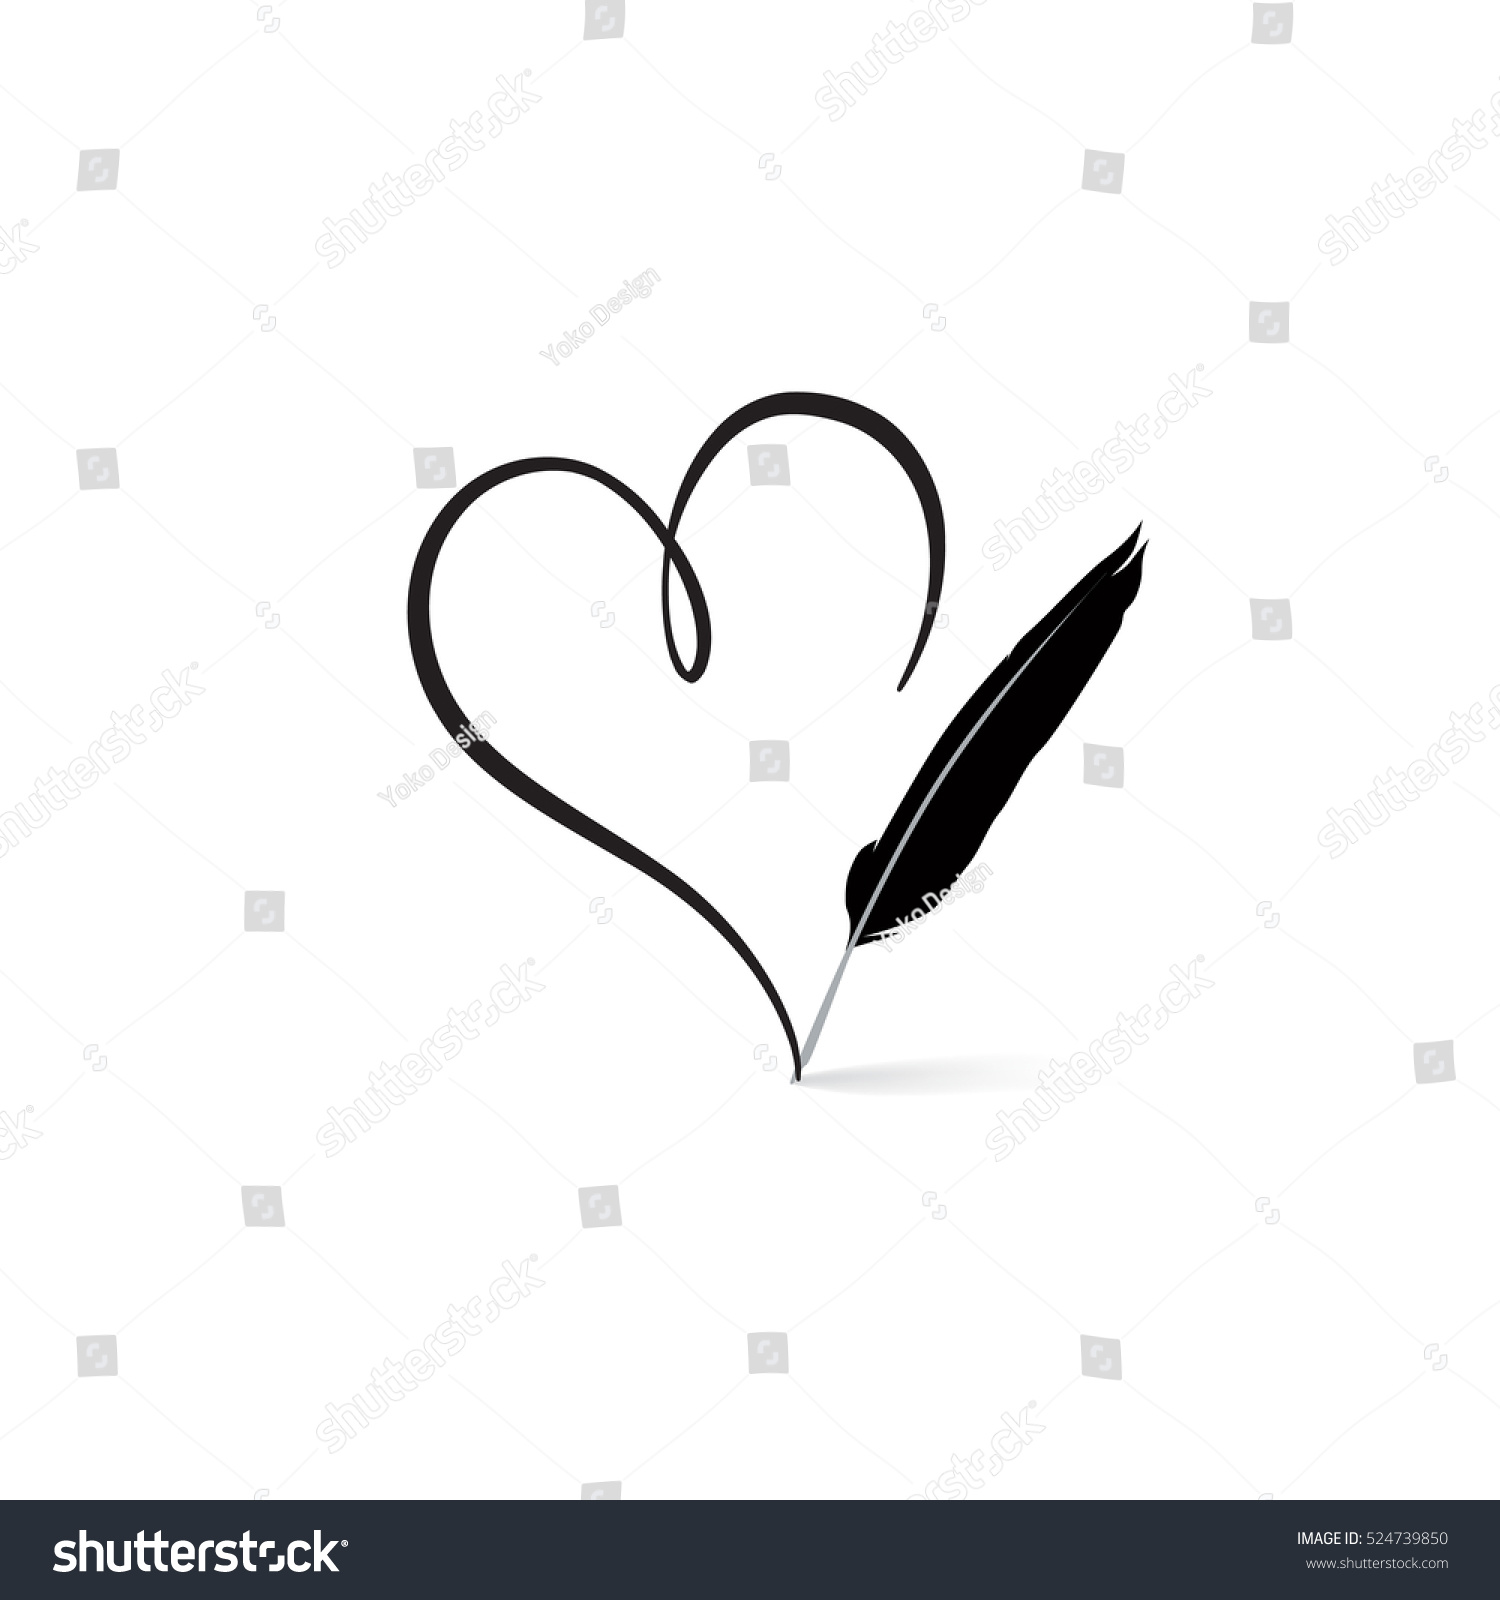 Love Heart Drawn By Feather Pen Stock Vector (Royalty Free) 524739850 ...